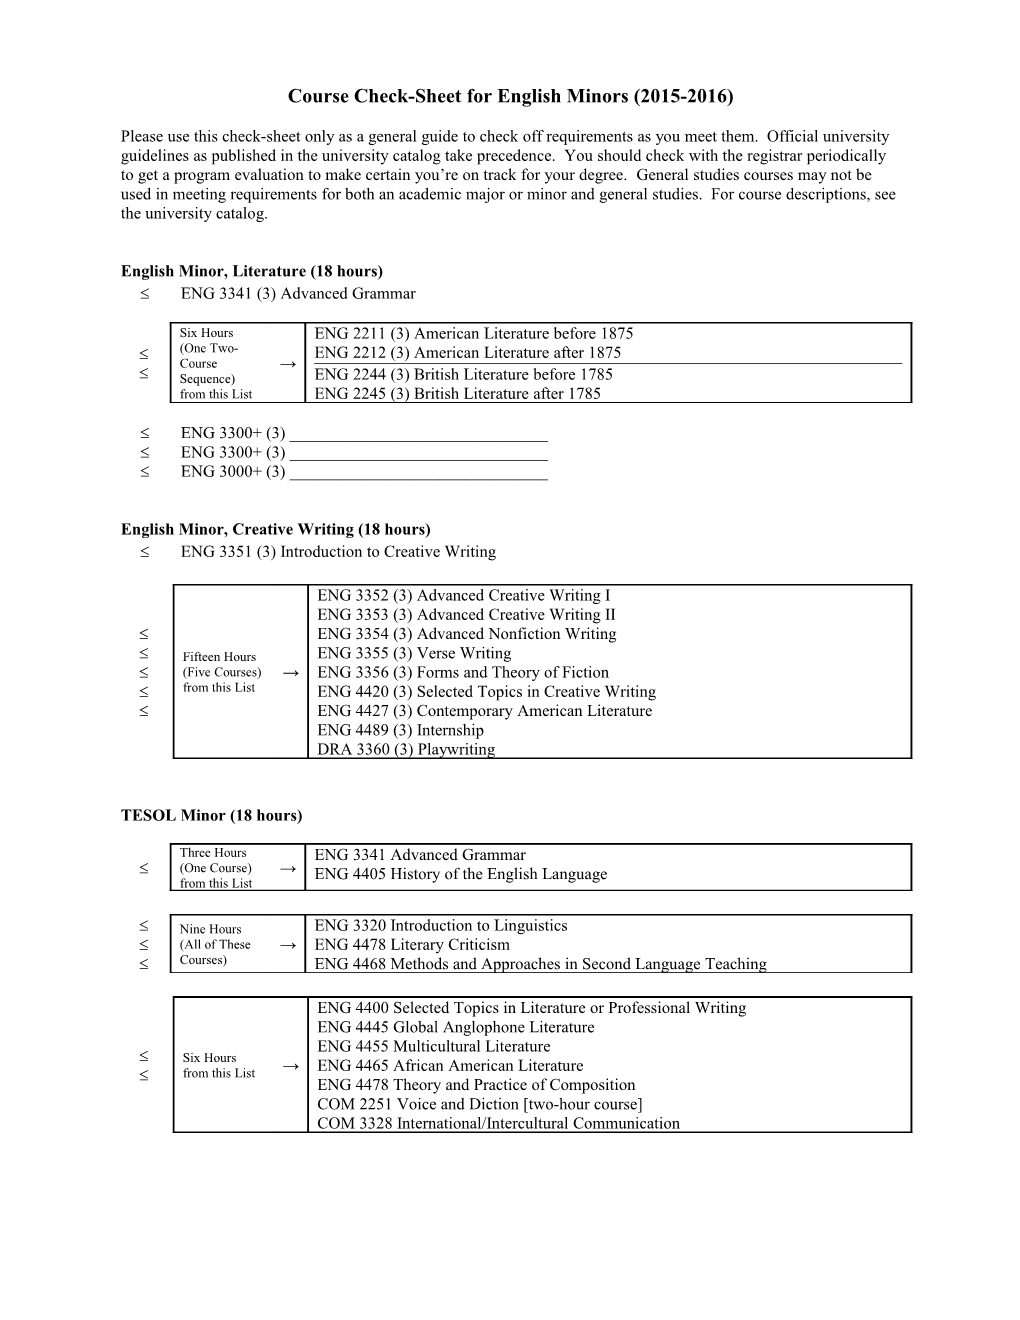 Course Check-Sheet for English Minors(2015-2016)